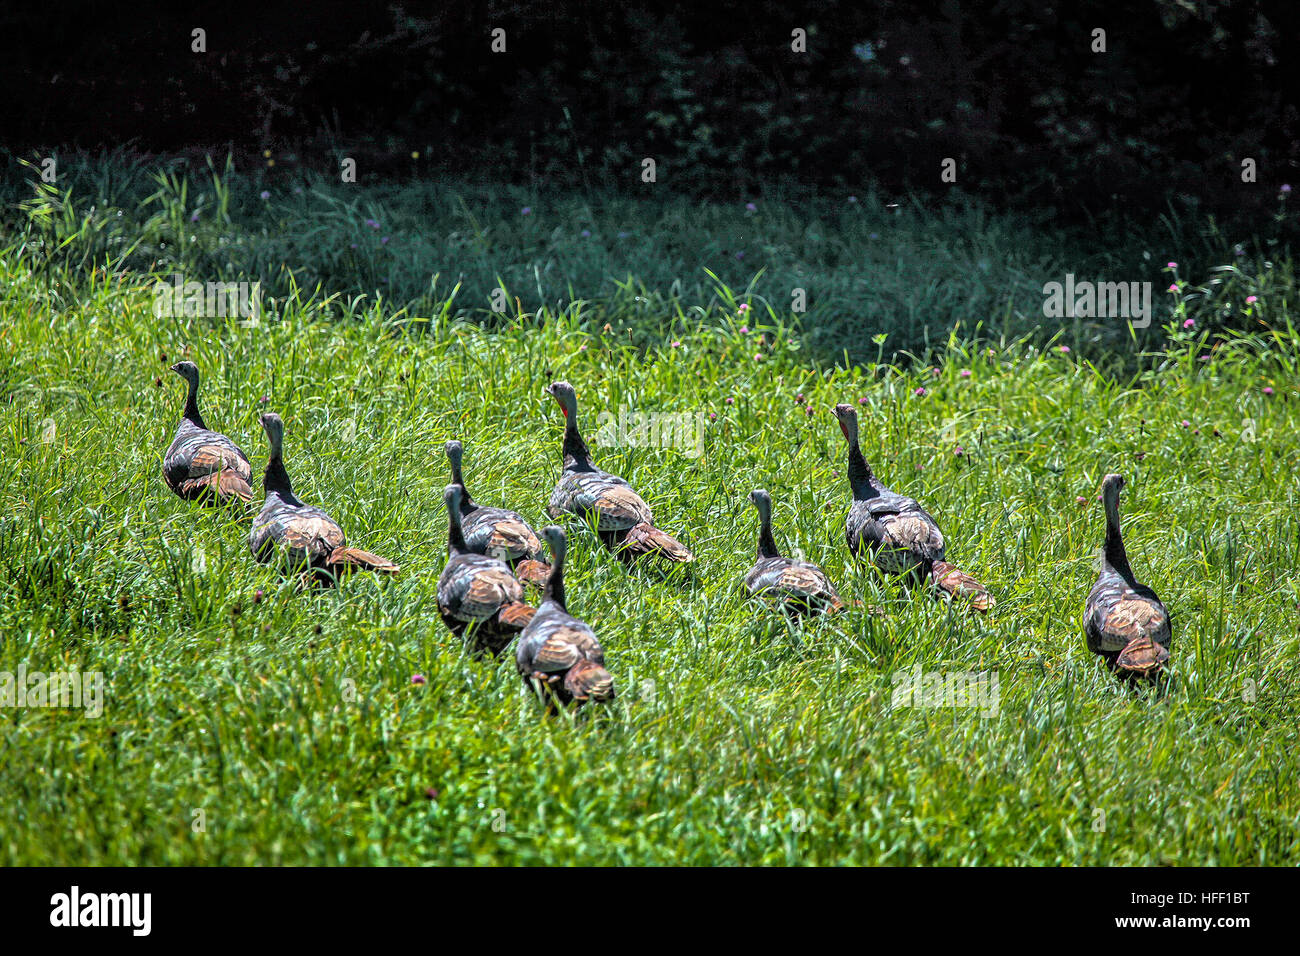 A flock of wild turkeys, Meleagris gallopavo silvestris, make their way through a field of tall grass in New Hampshire. Stock Photo